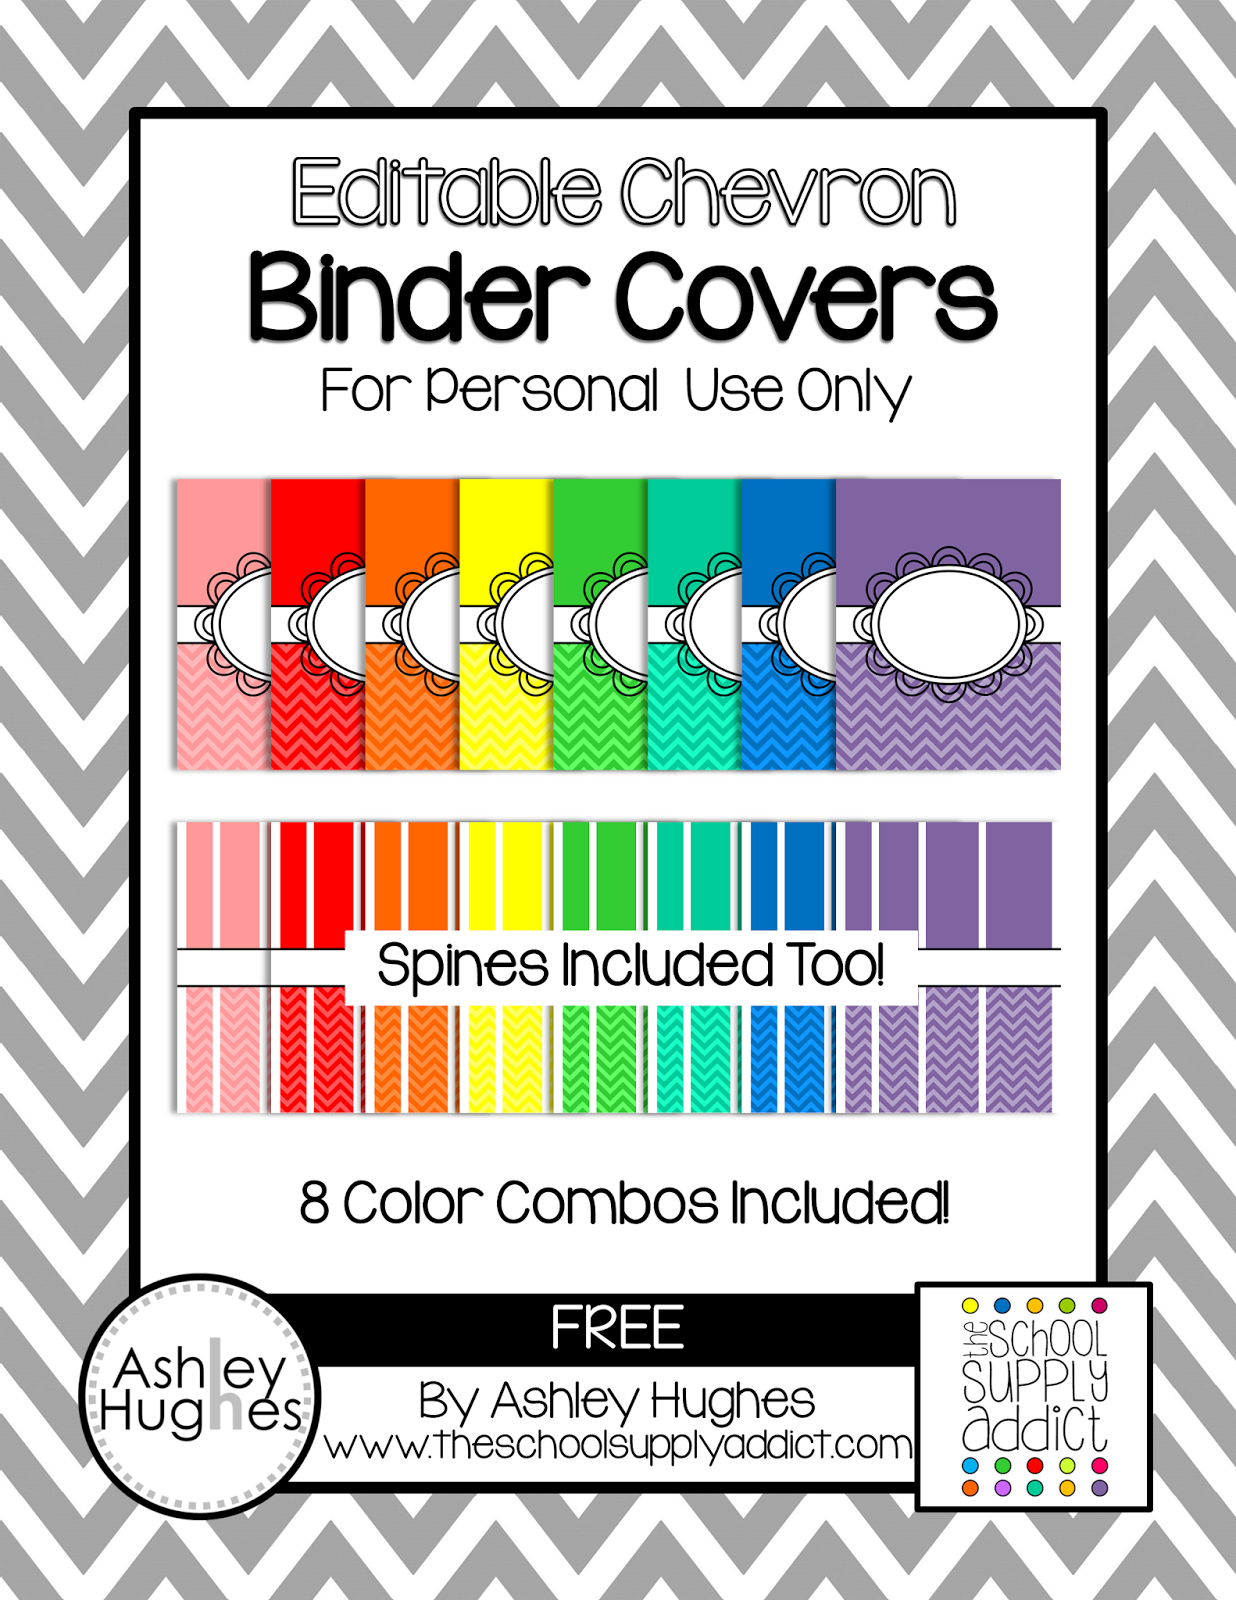 Best Free Editable Printable Binder Covers And Spines 